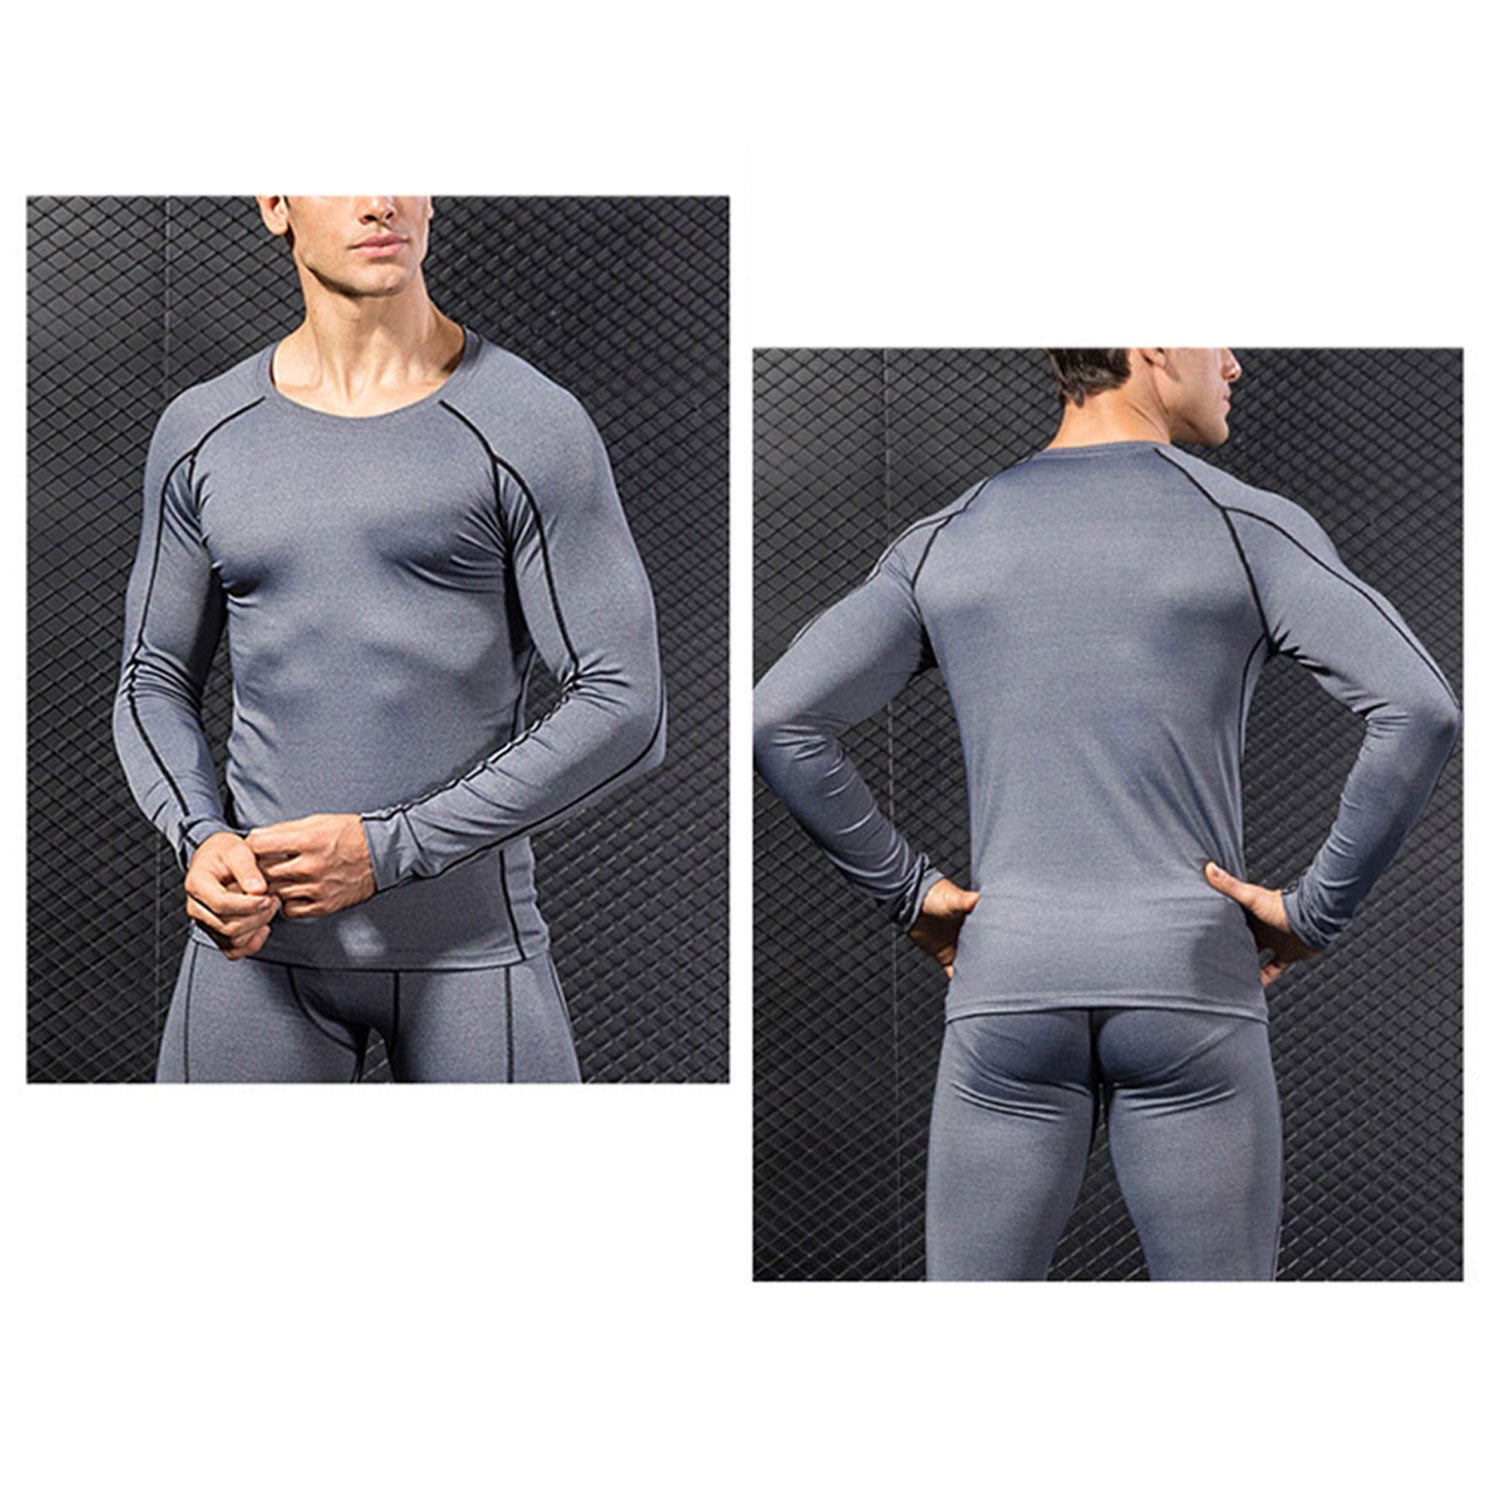 ALQYST Compression Clothing Men T Shirt + Leggings Long Sleeved Top Base  Kit For Man Fitness Workout Thermal Underwear,Gray - suit,XL price in UAE,  UAE